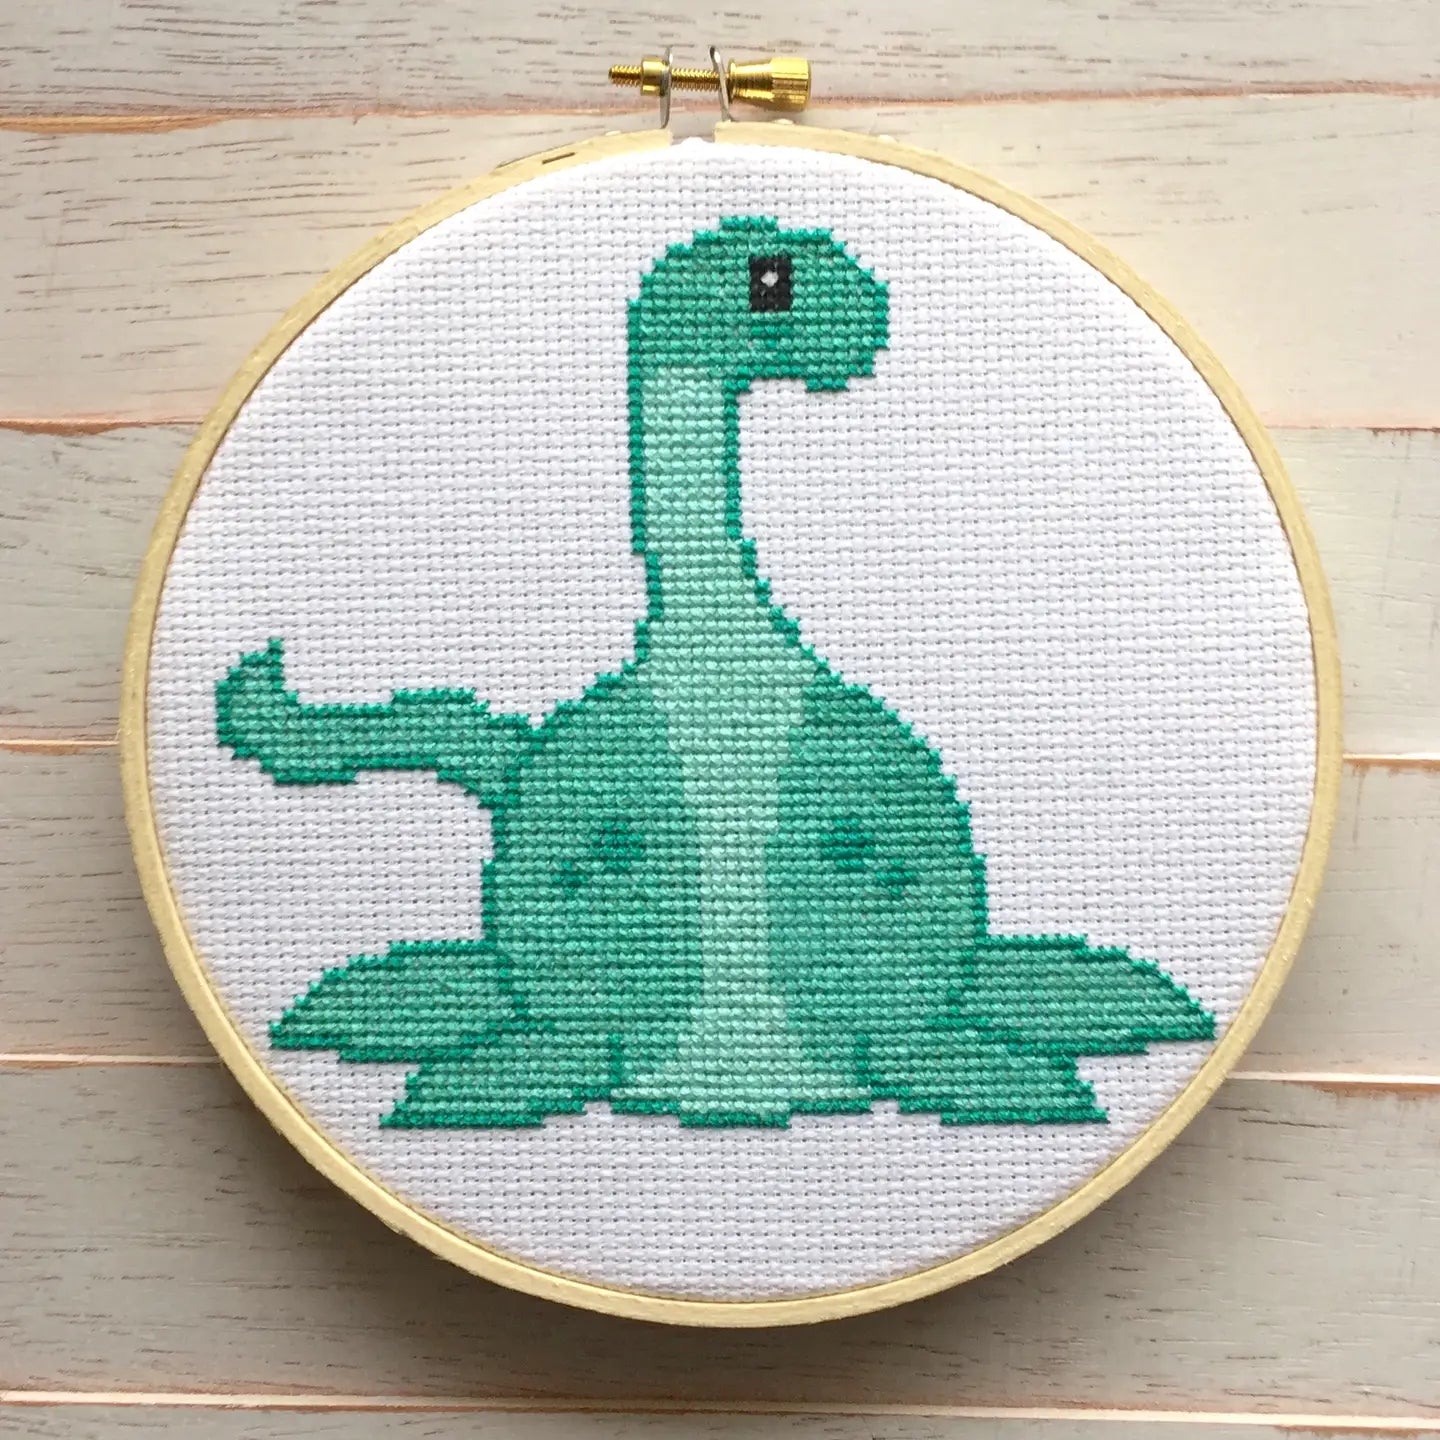 Lochness Monster Counted Cross Stitch Diy Kit